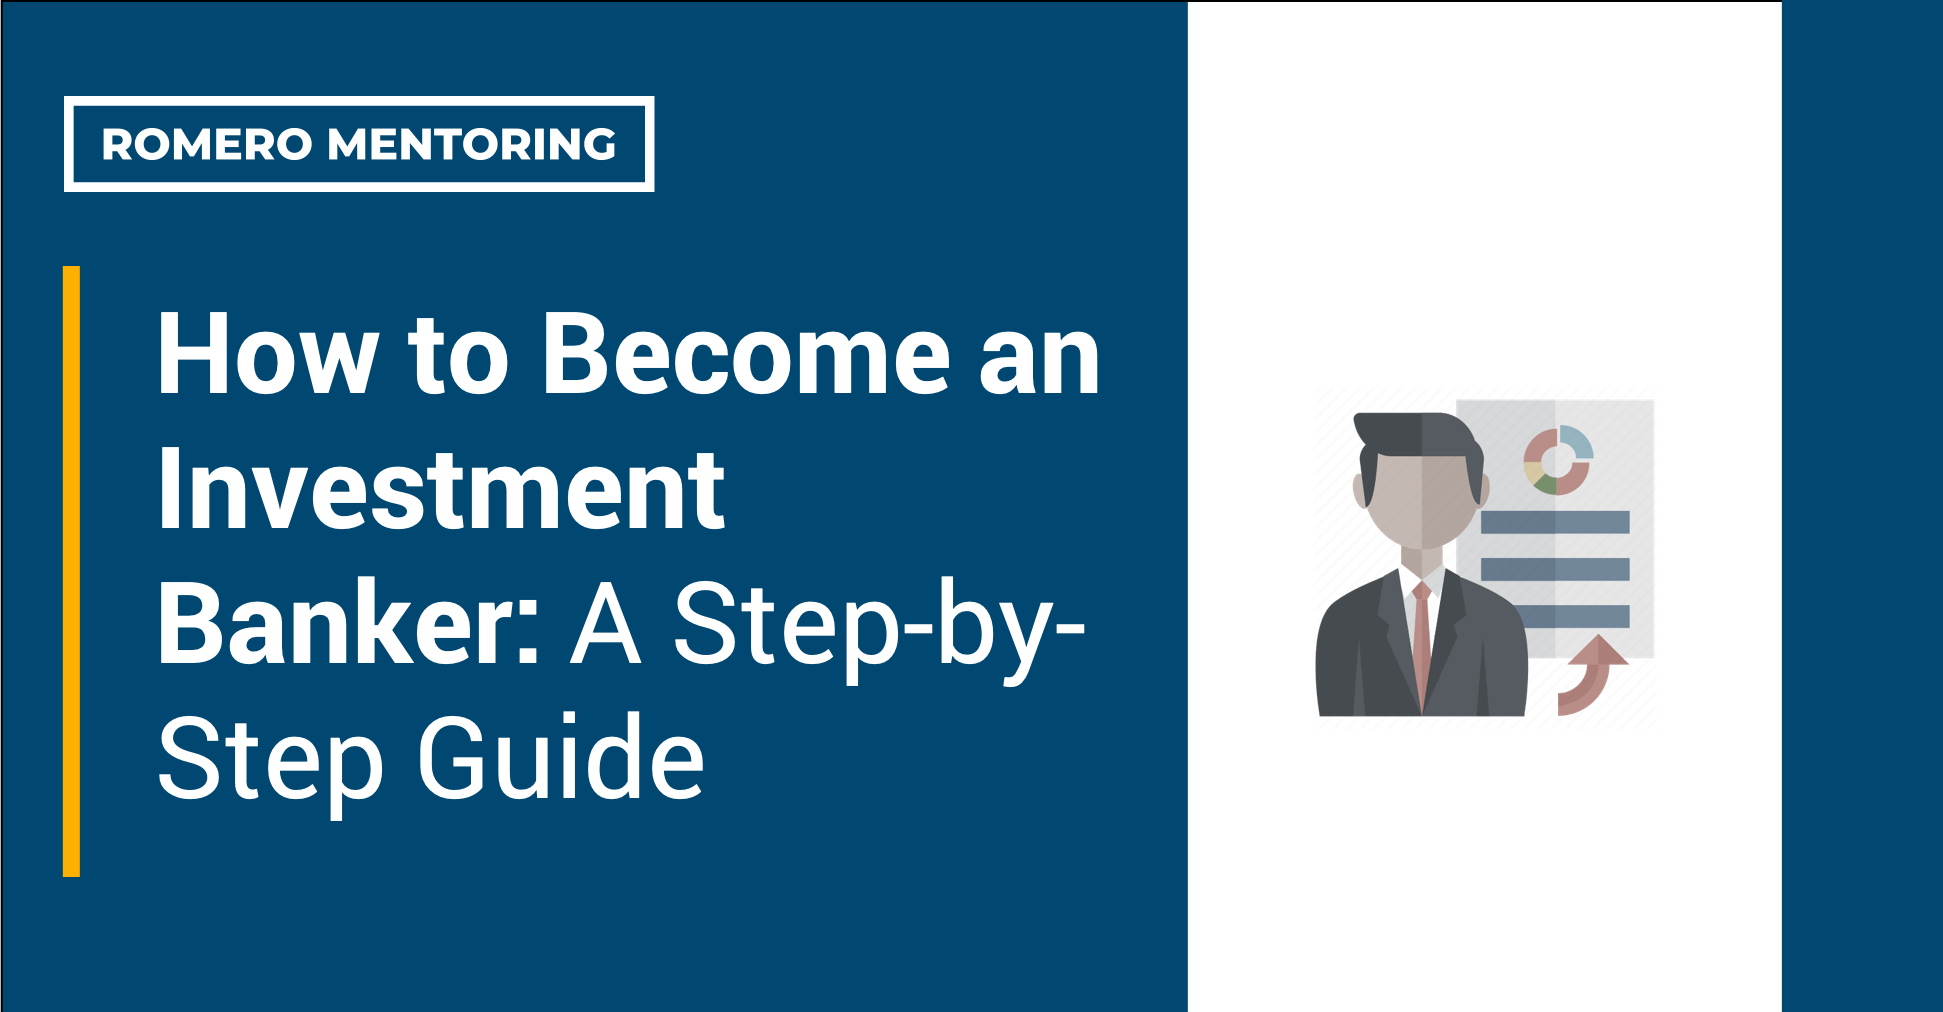 How to Become an Investment Banker: A Step-by-Step Guide